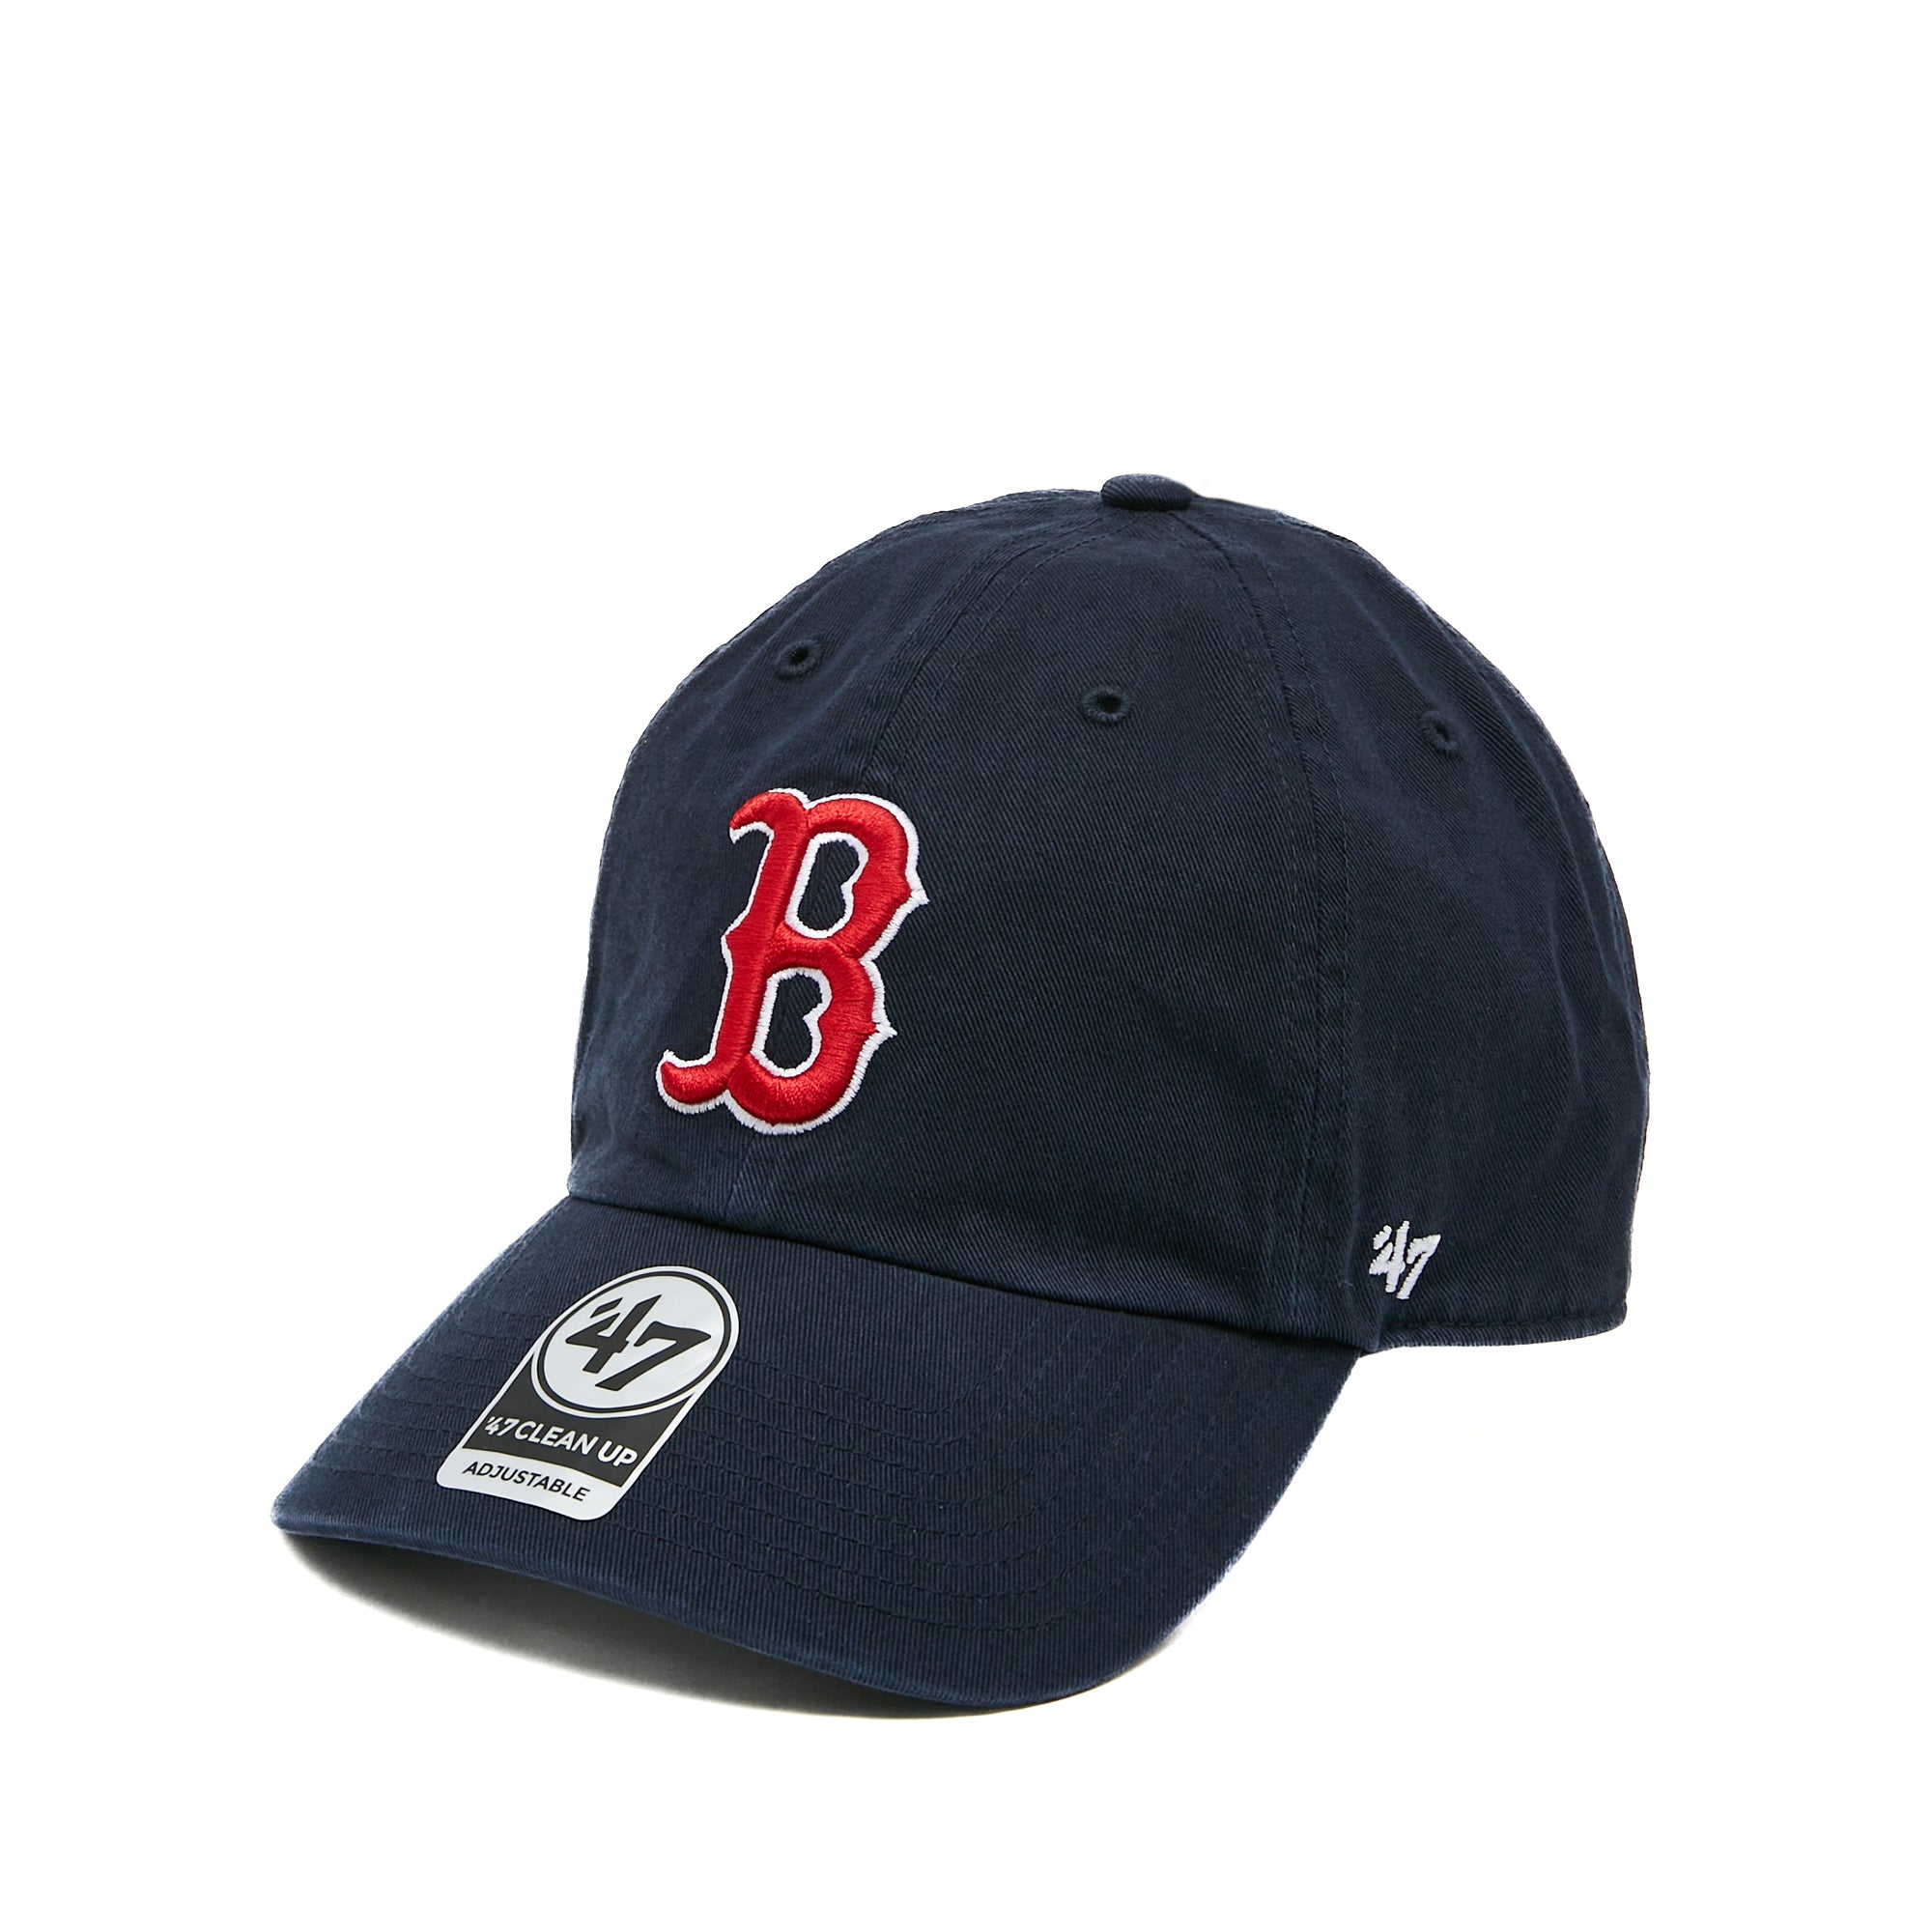 MLB Boston Red Sox '47 Clean Up Cap Navy One Size